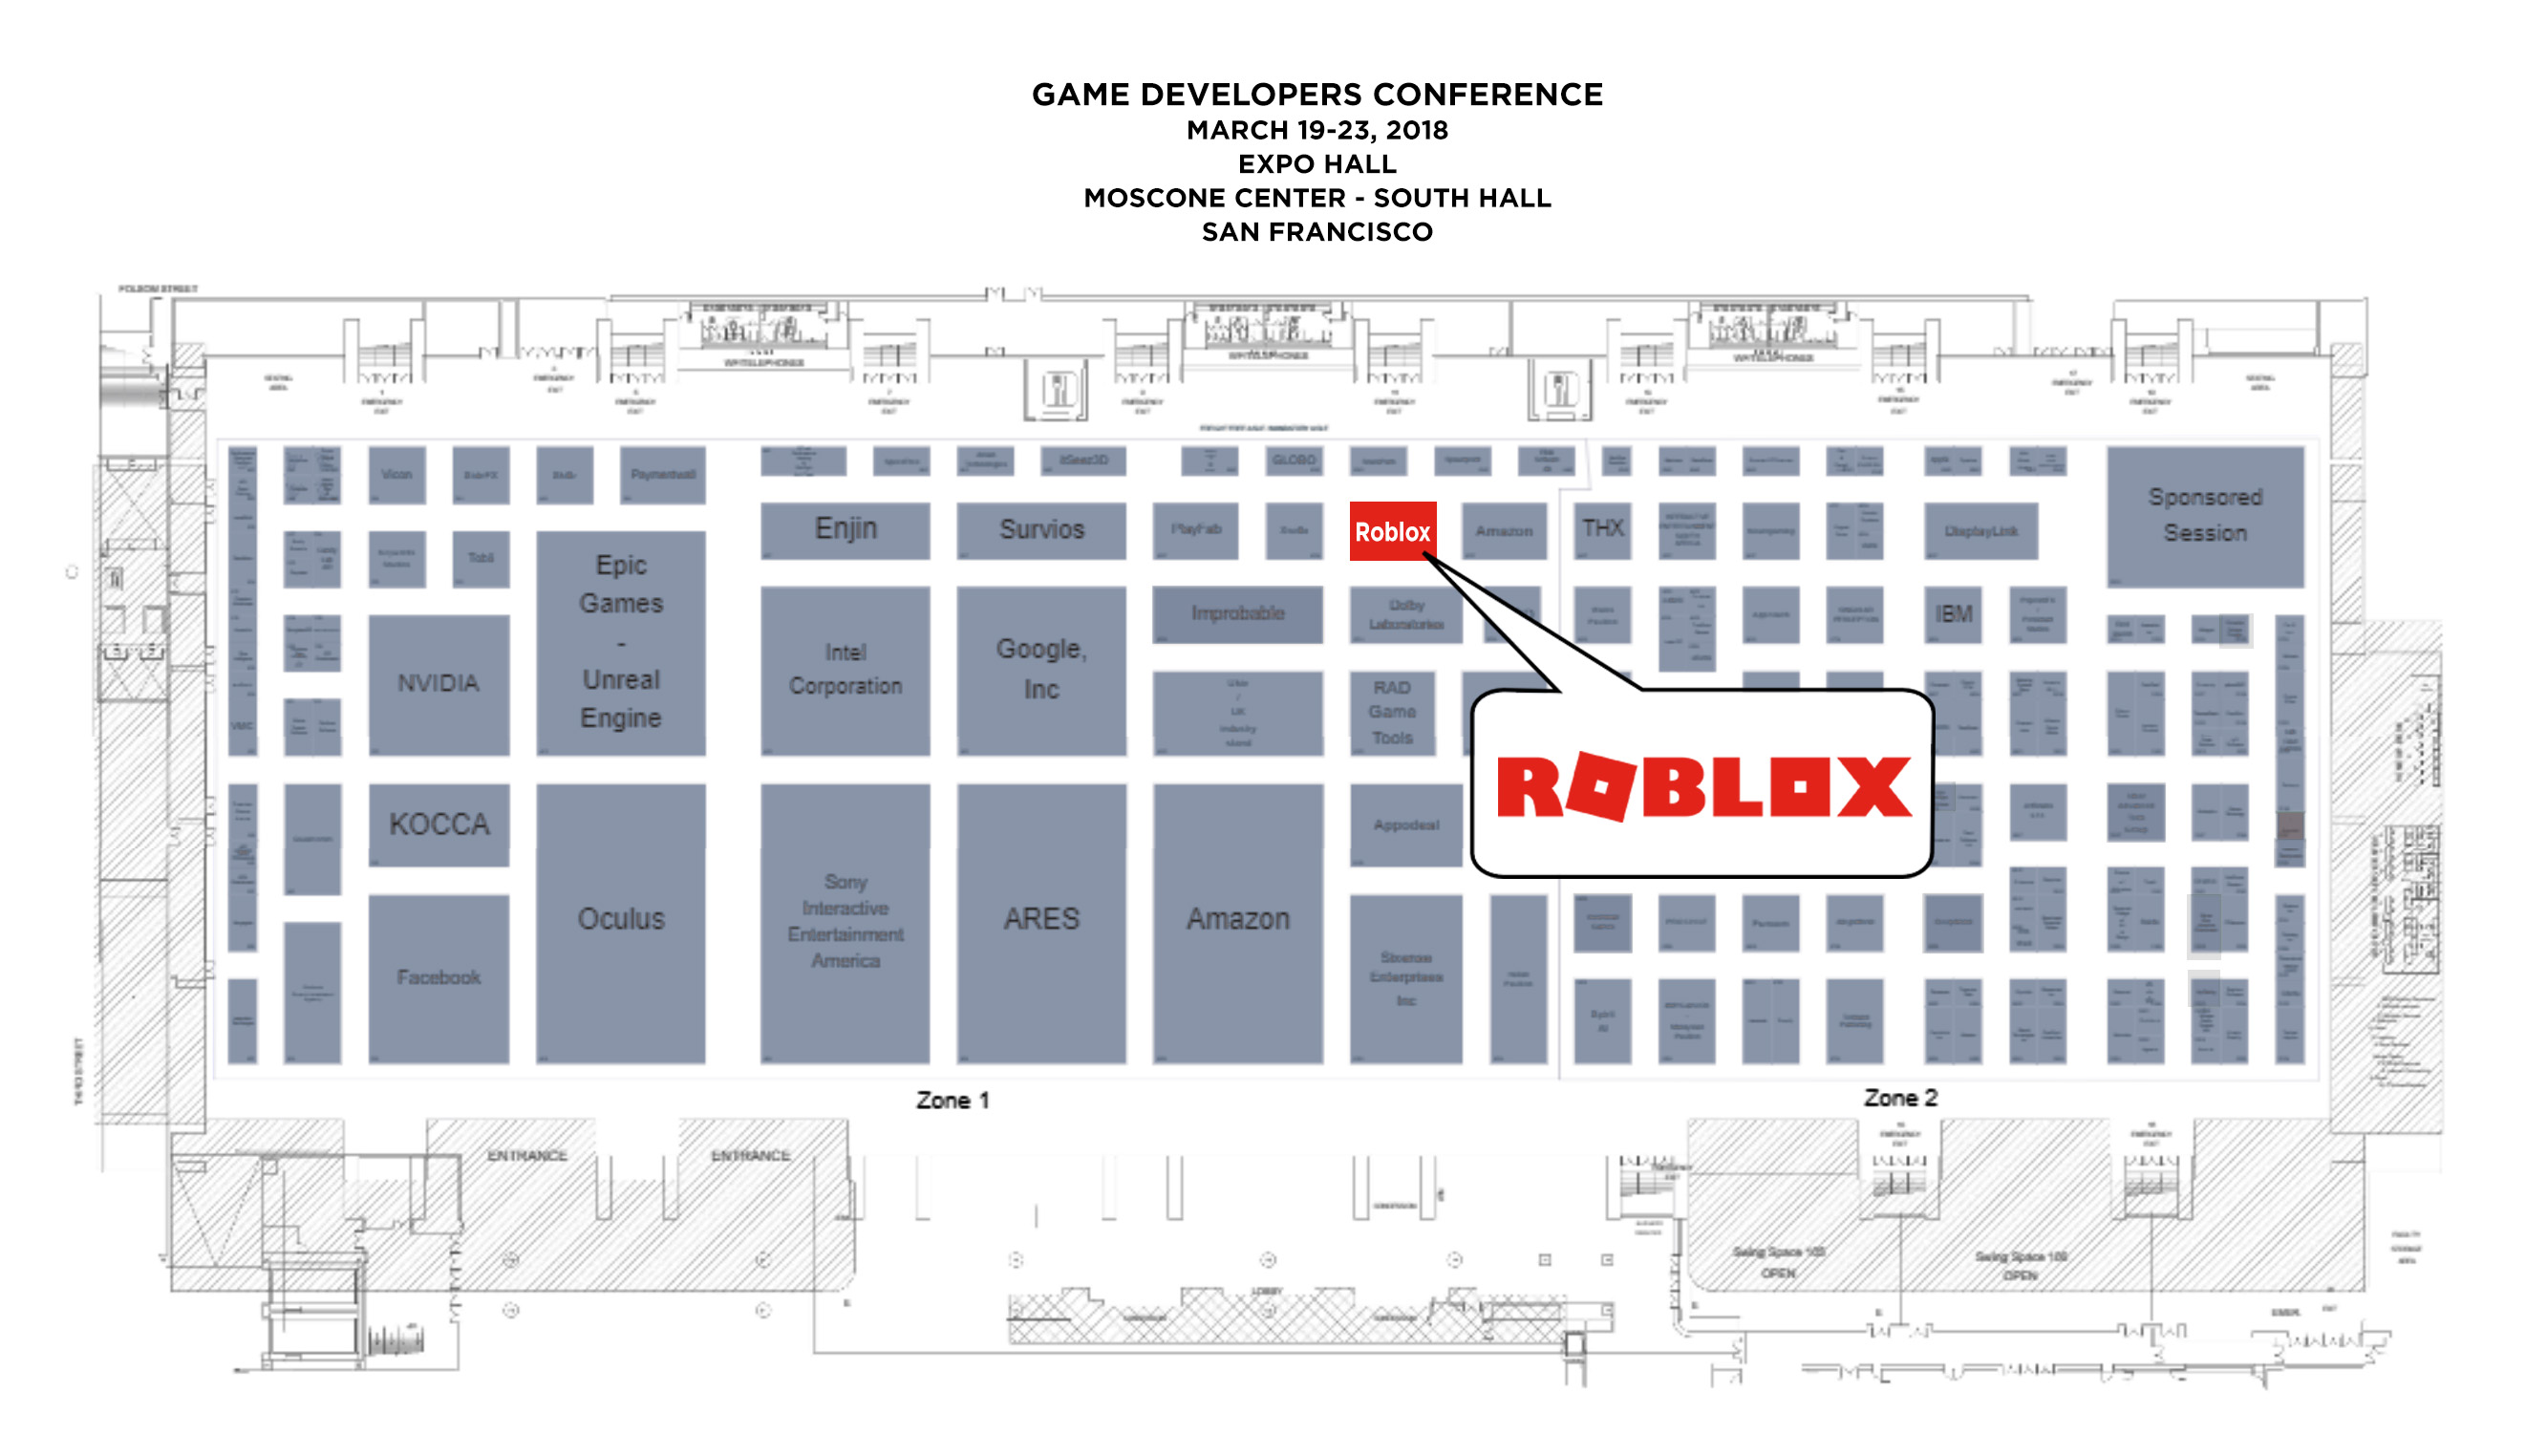 Connect With Roblox At Gdc 2018 Roblox Blog - roblox developer relations en twitter got any questions